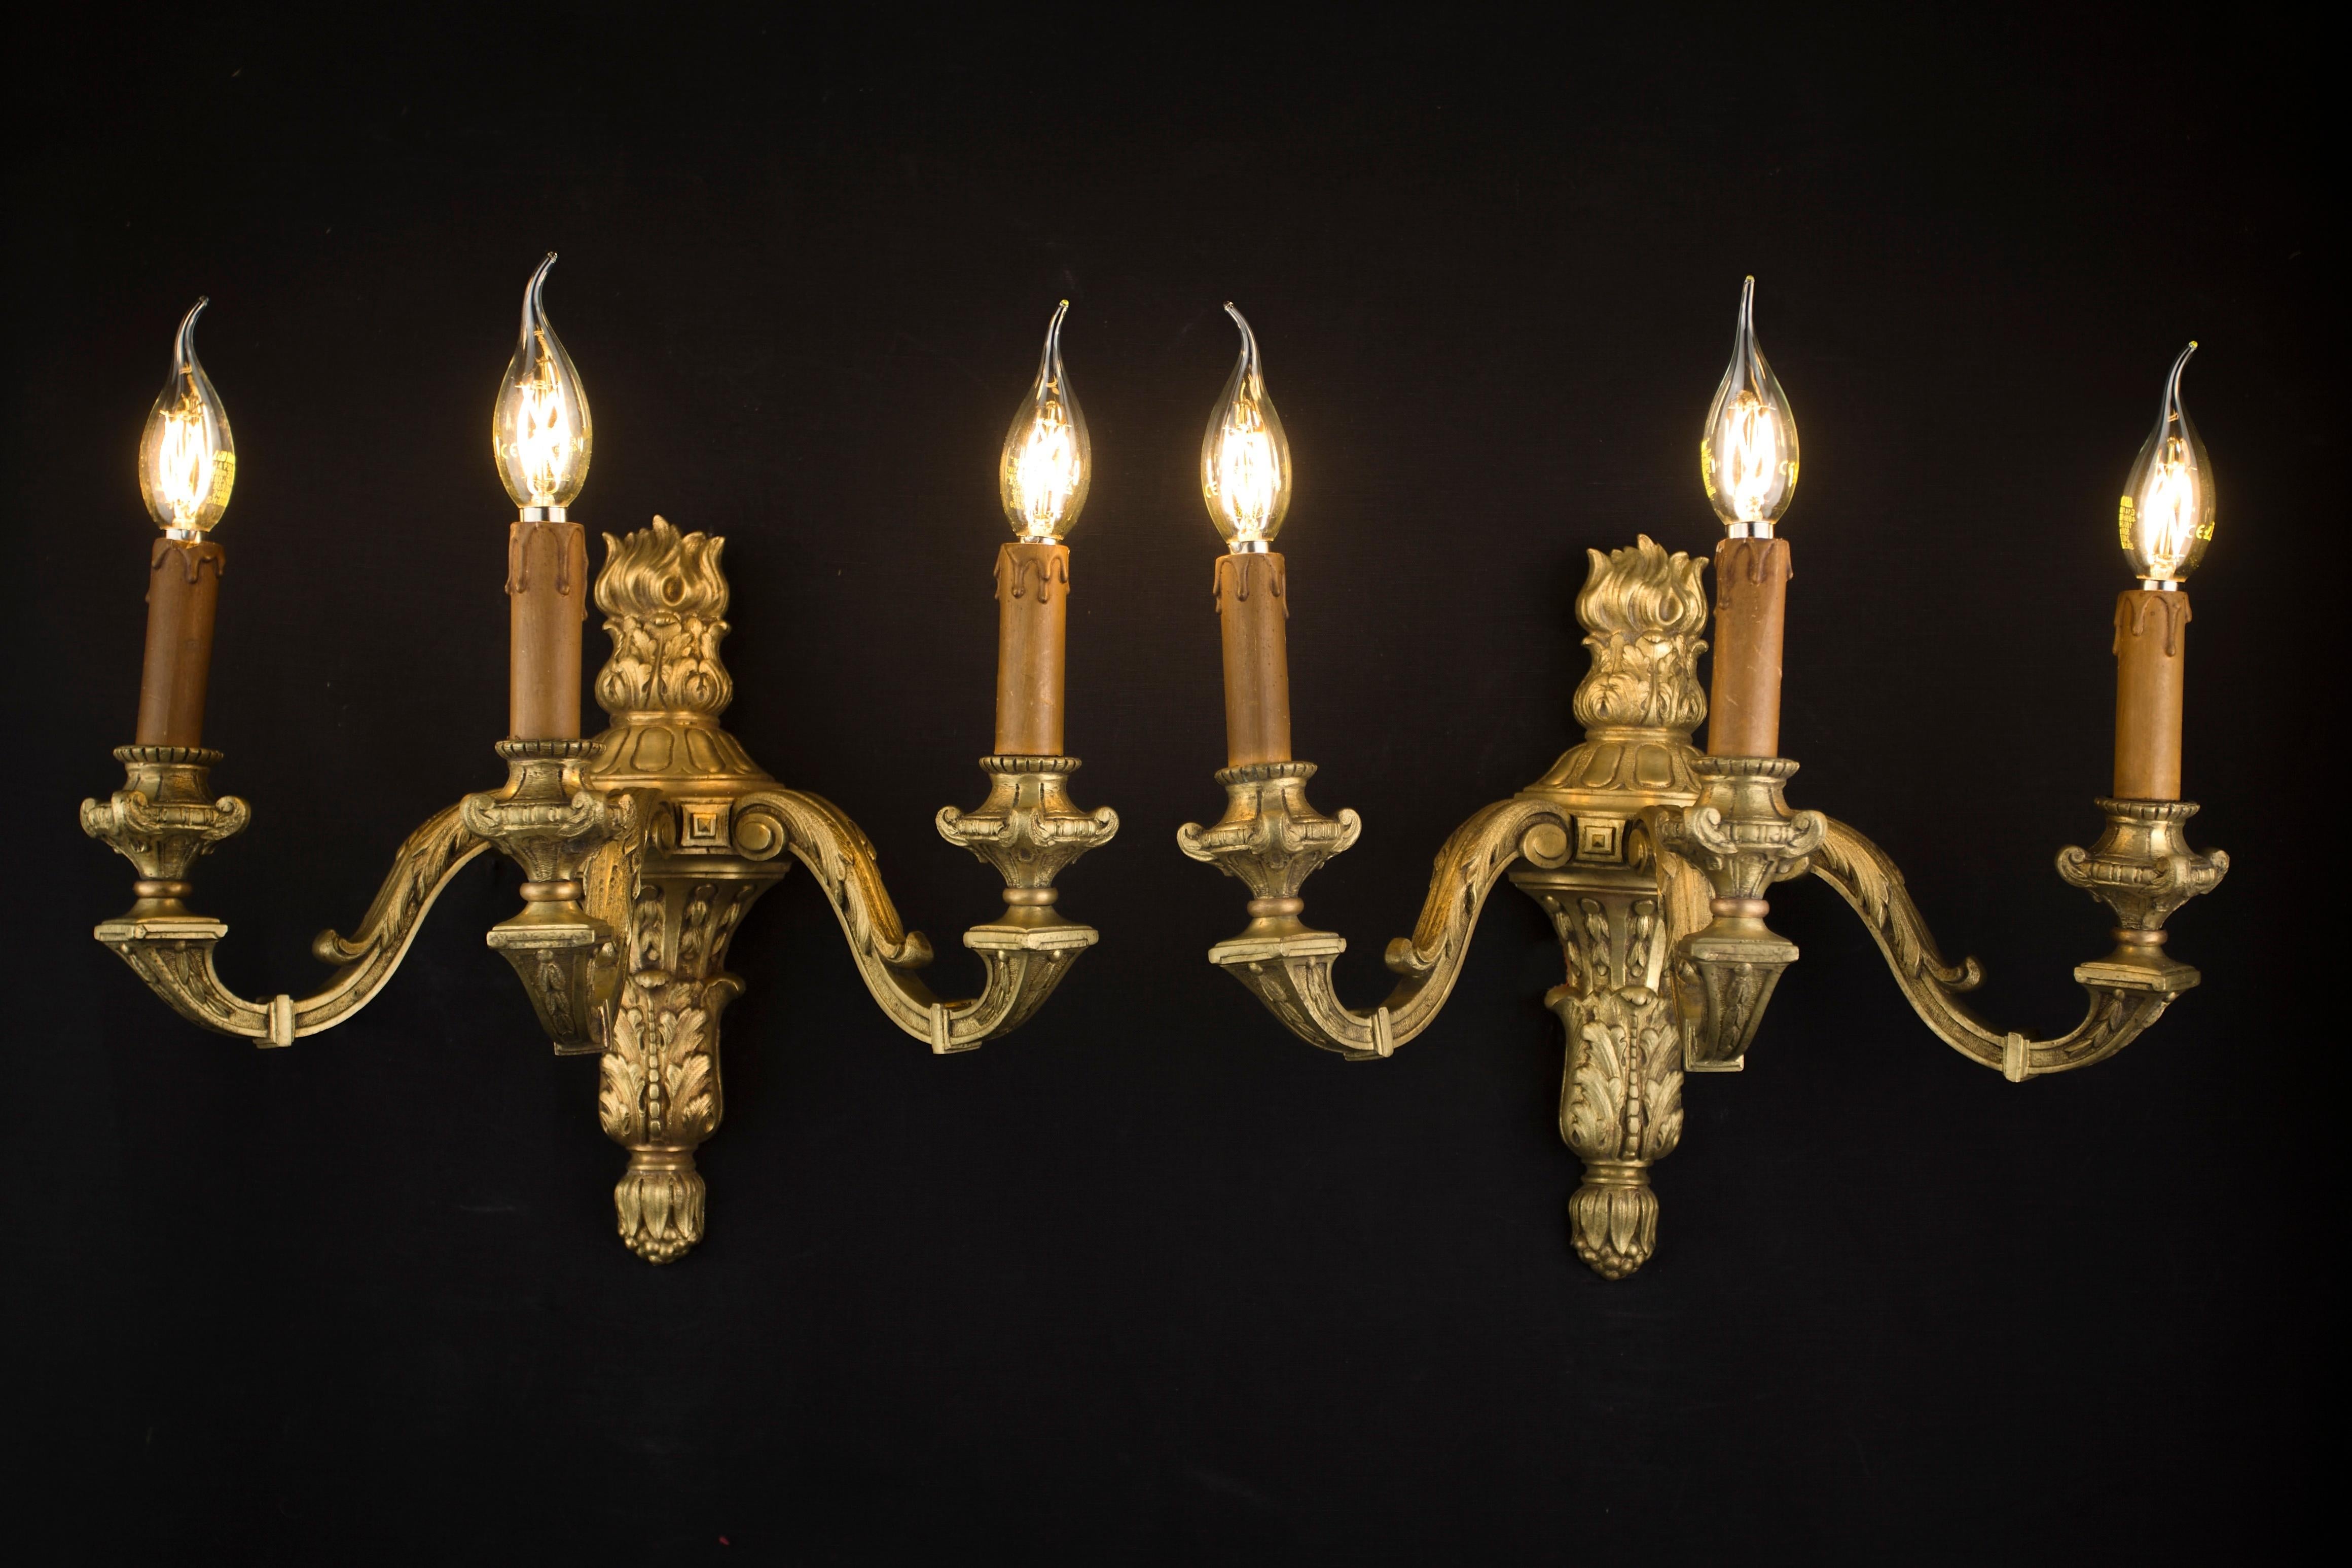 Pair of Mazarin wall lamps

Heavy solid brass wall lamps of the Mazarin type. French work from the mid-19th century. Luxurious design and massiveness will give the interior a higher level. The lamps have new wiring in copper. Original pods (it is